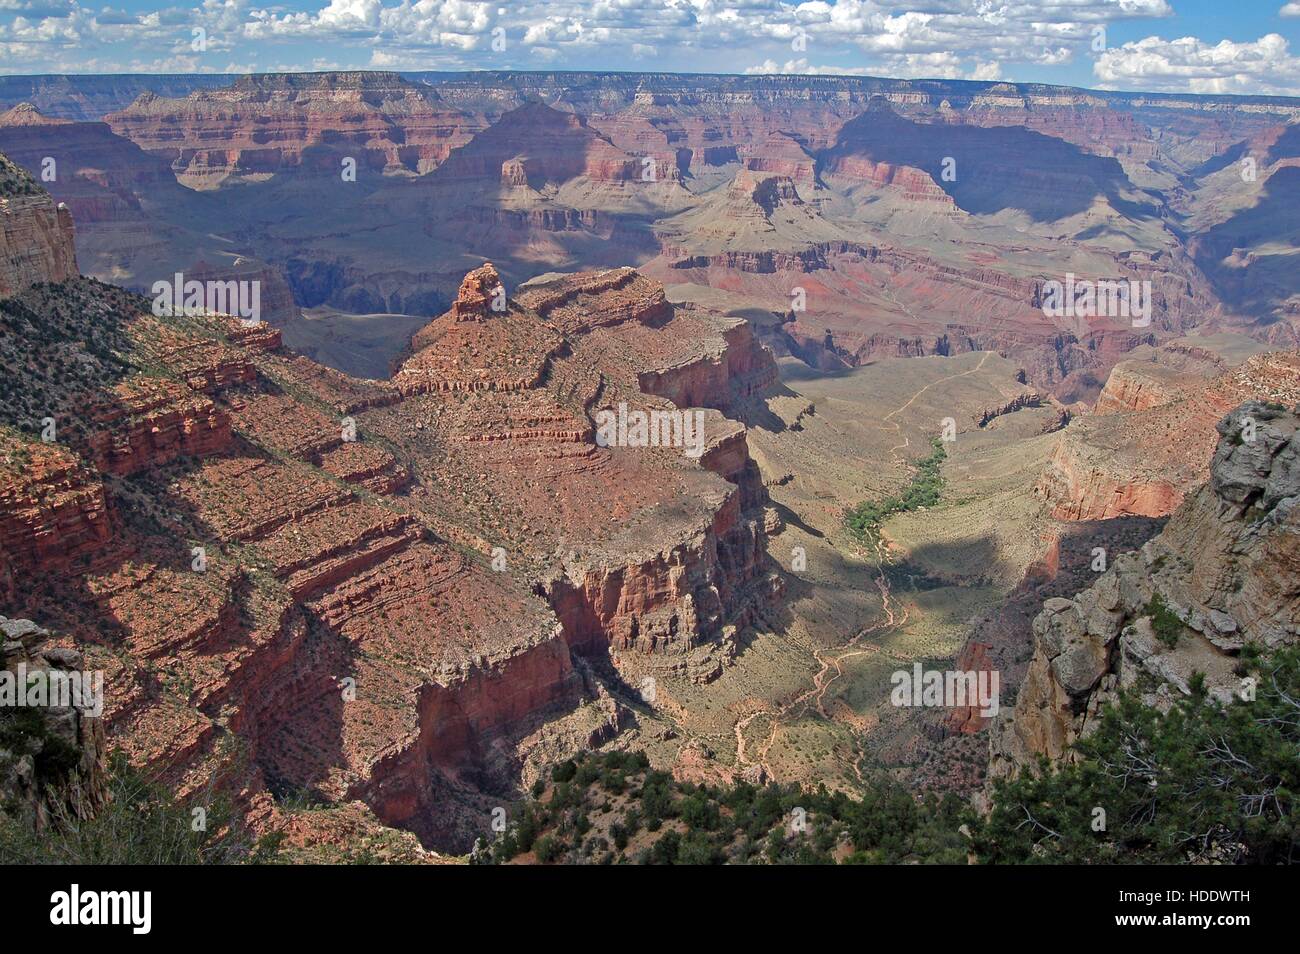 An aerial view of the Battleship and Indian Garden rock formations in the South Rim of the Grand Canyon National Park as seen from the El Tovar Hotel overlook July 4, 2010 in Grand Canyon Village, Arizona. Stock Photo